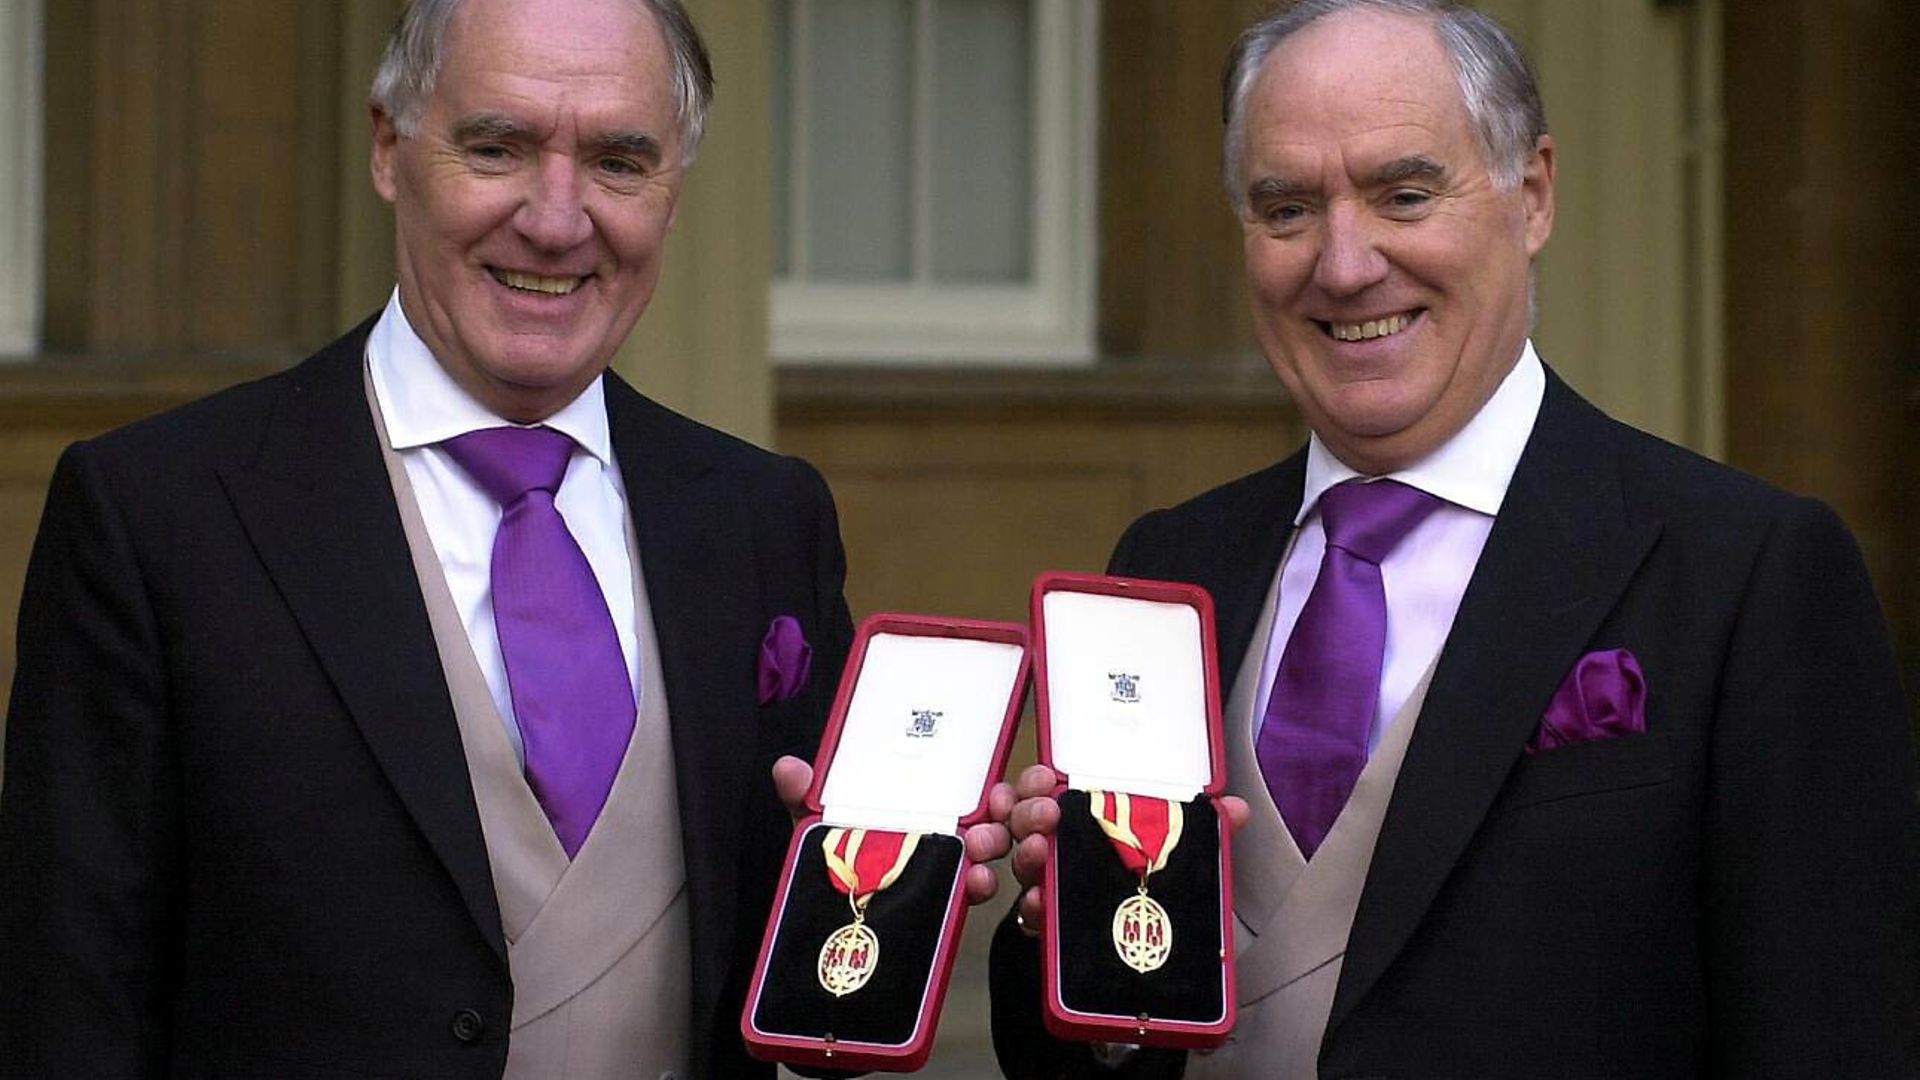 Multi-millionaires Sir David Barclay (left) and his twin brother Sir Frederick after receiving their knighthoods from the Queen at Buckingham Palace. - Credit: PA